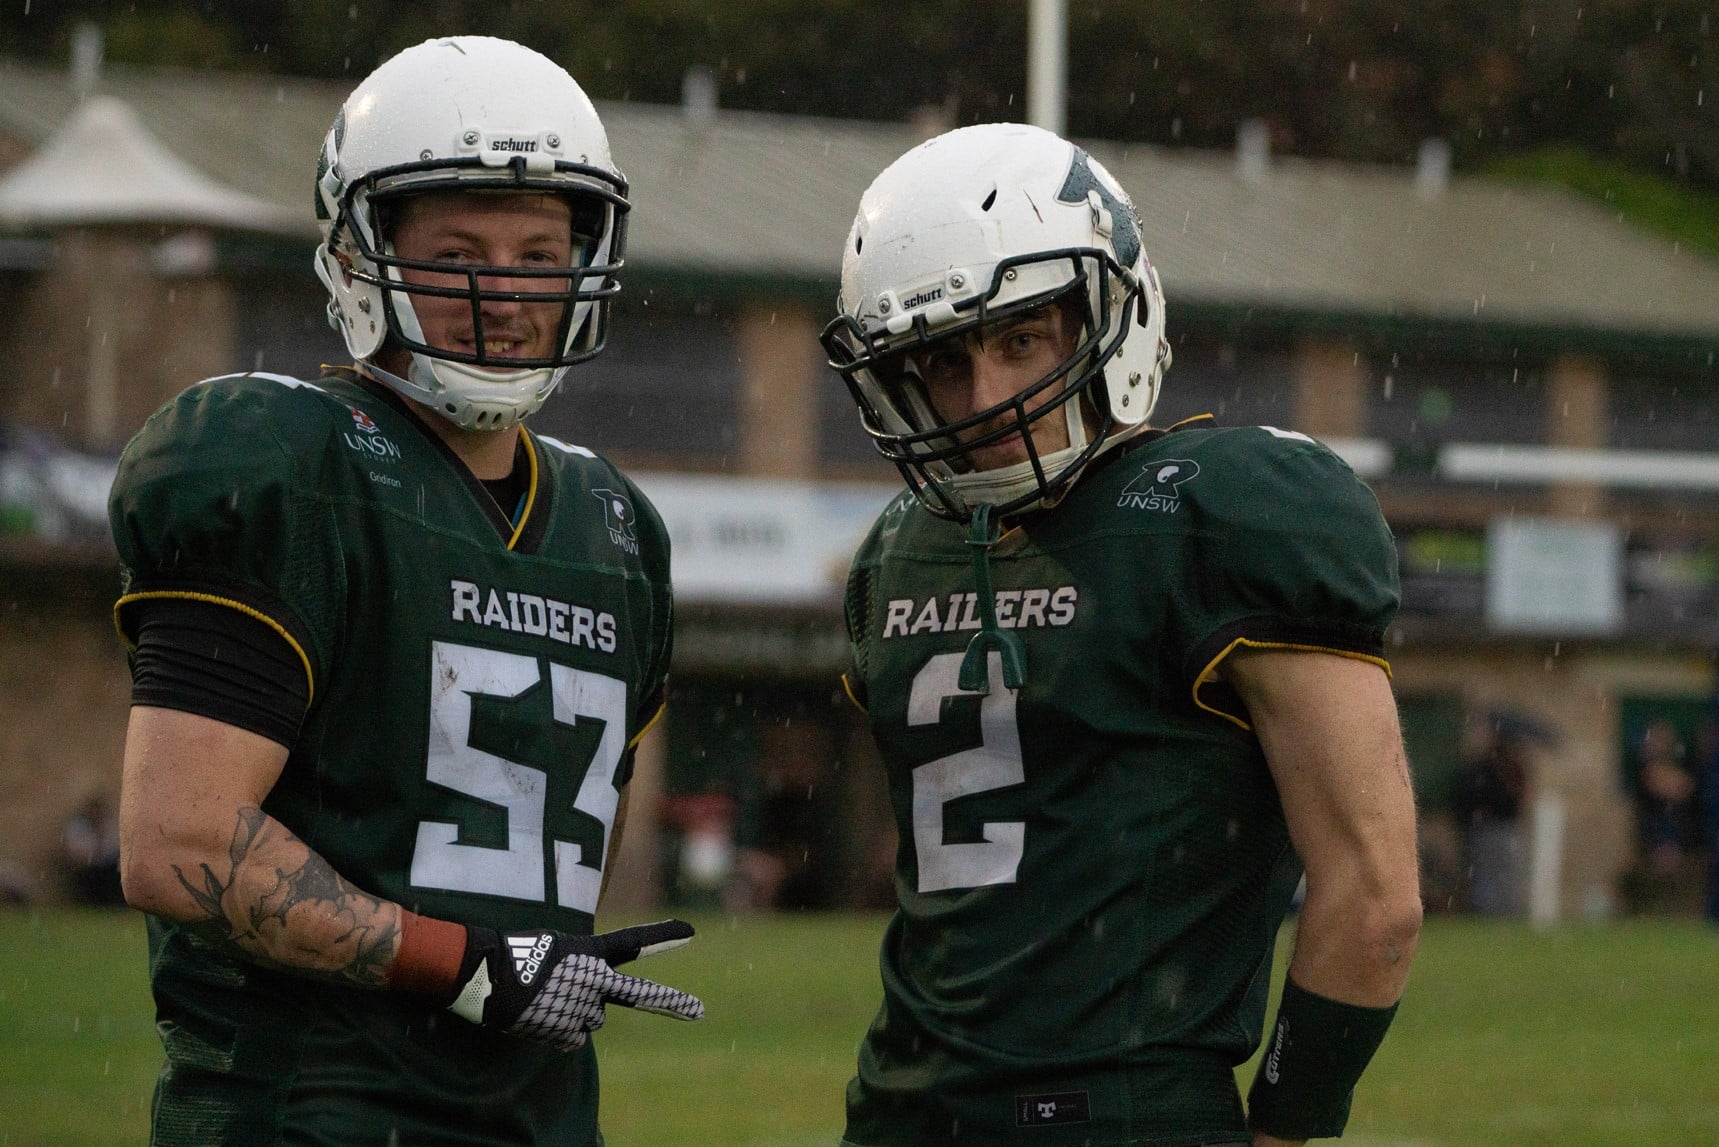 Two Raiders players standing in the rain